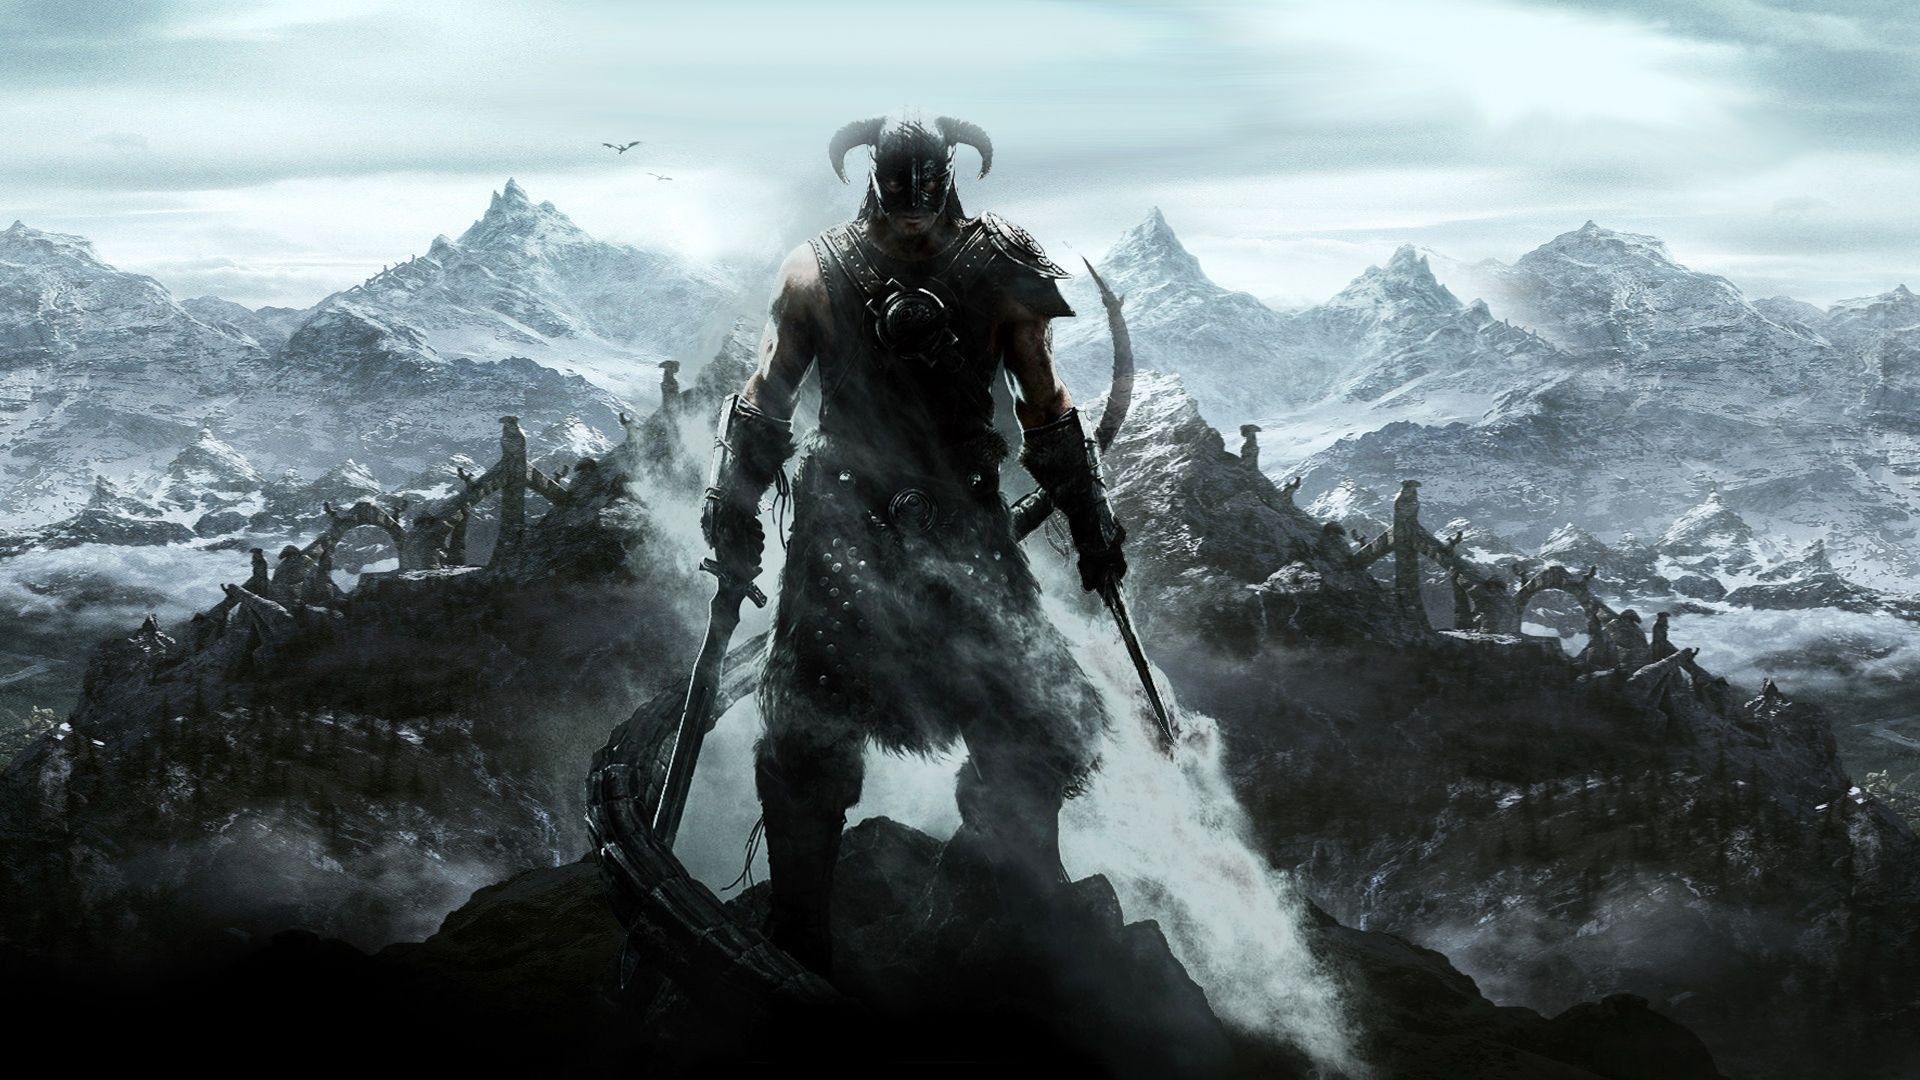 Skyrim special edition wallpapers